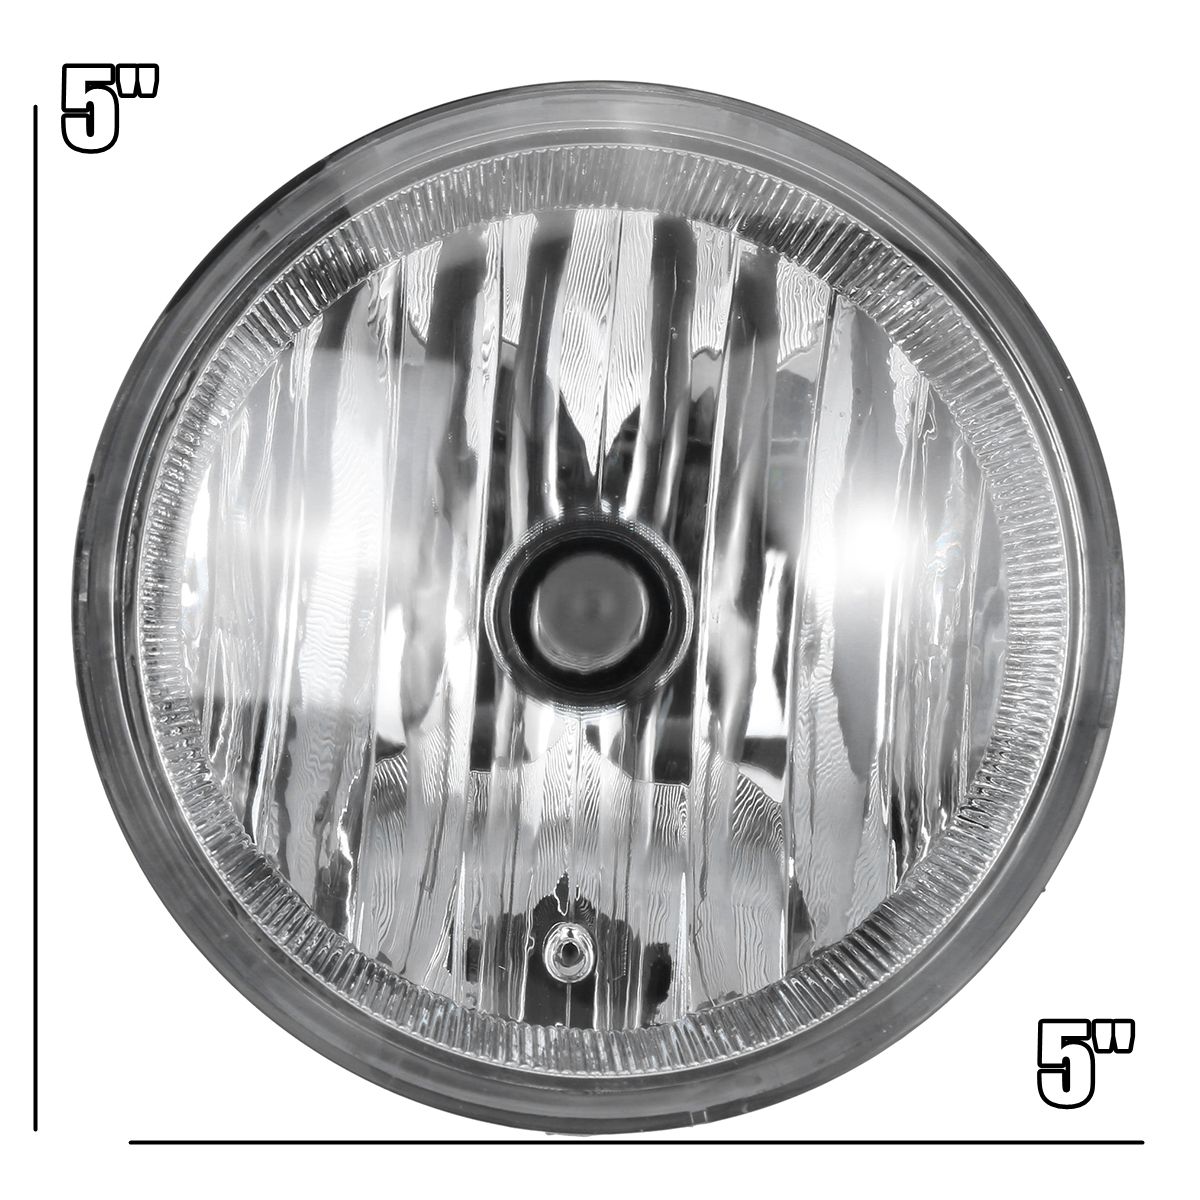 Front-Spot-Fog-Light-Lamps-Clear-Plastic-Pair-with-H10-Buls-For-Toyota-Tacoma-Solara-Sequoia-Tundra-1724041